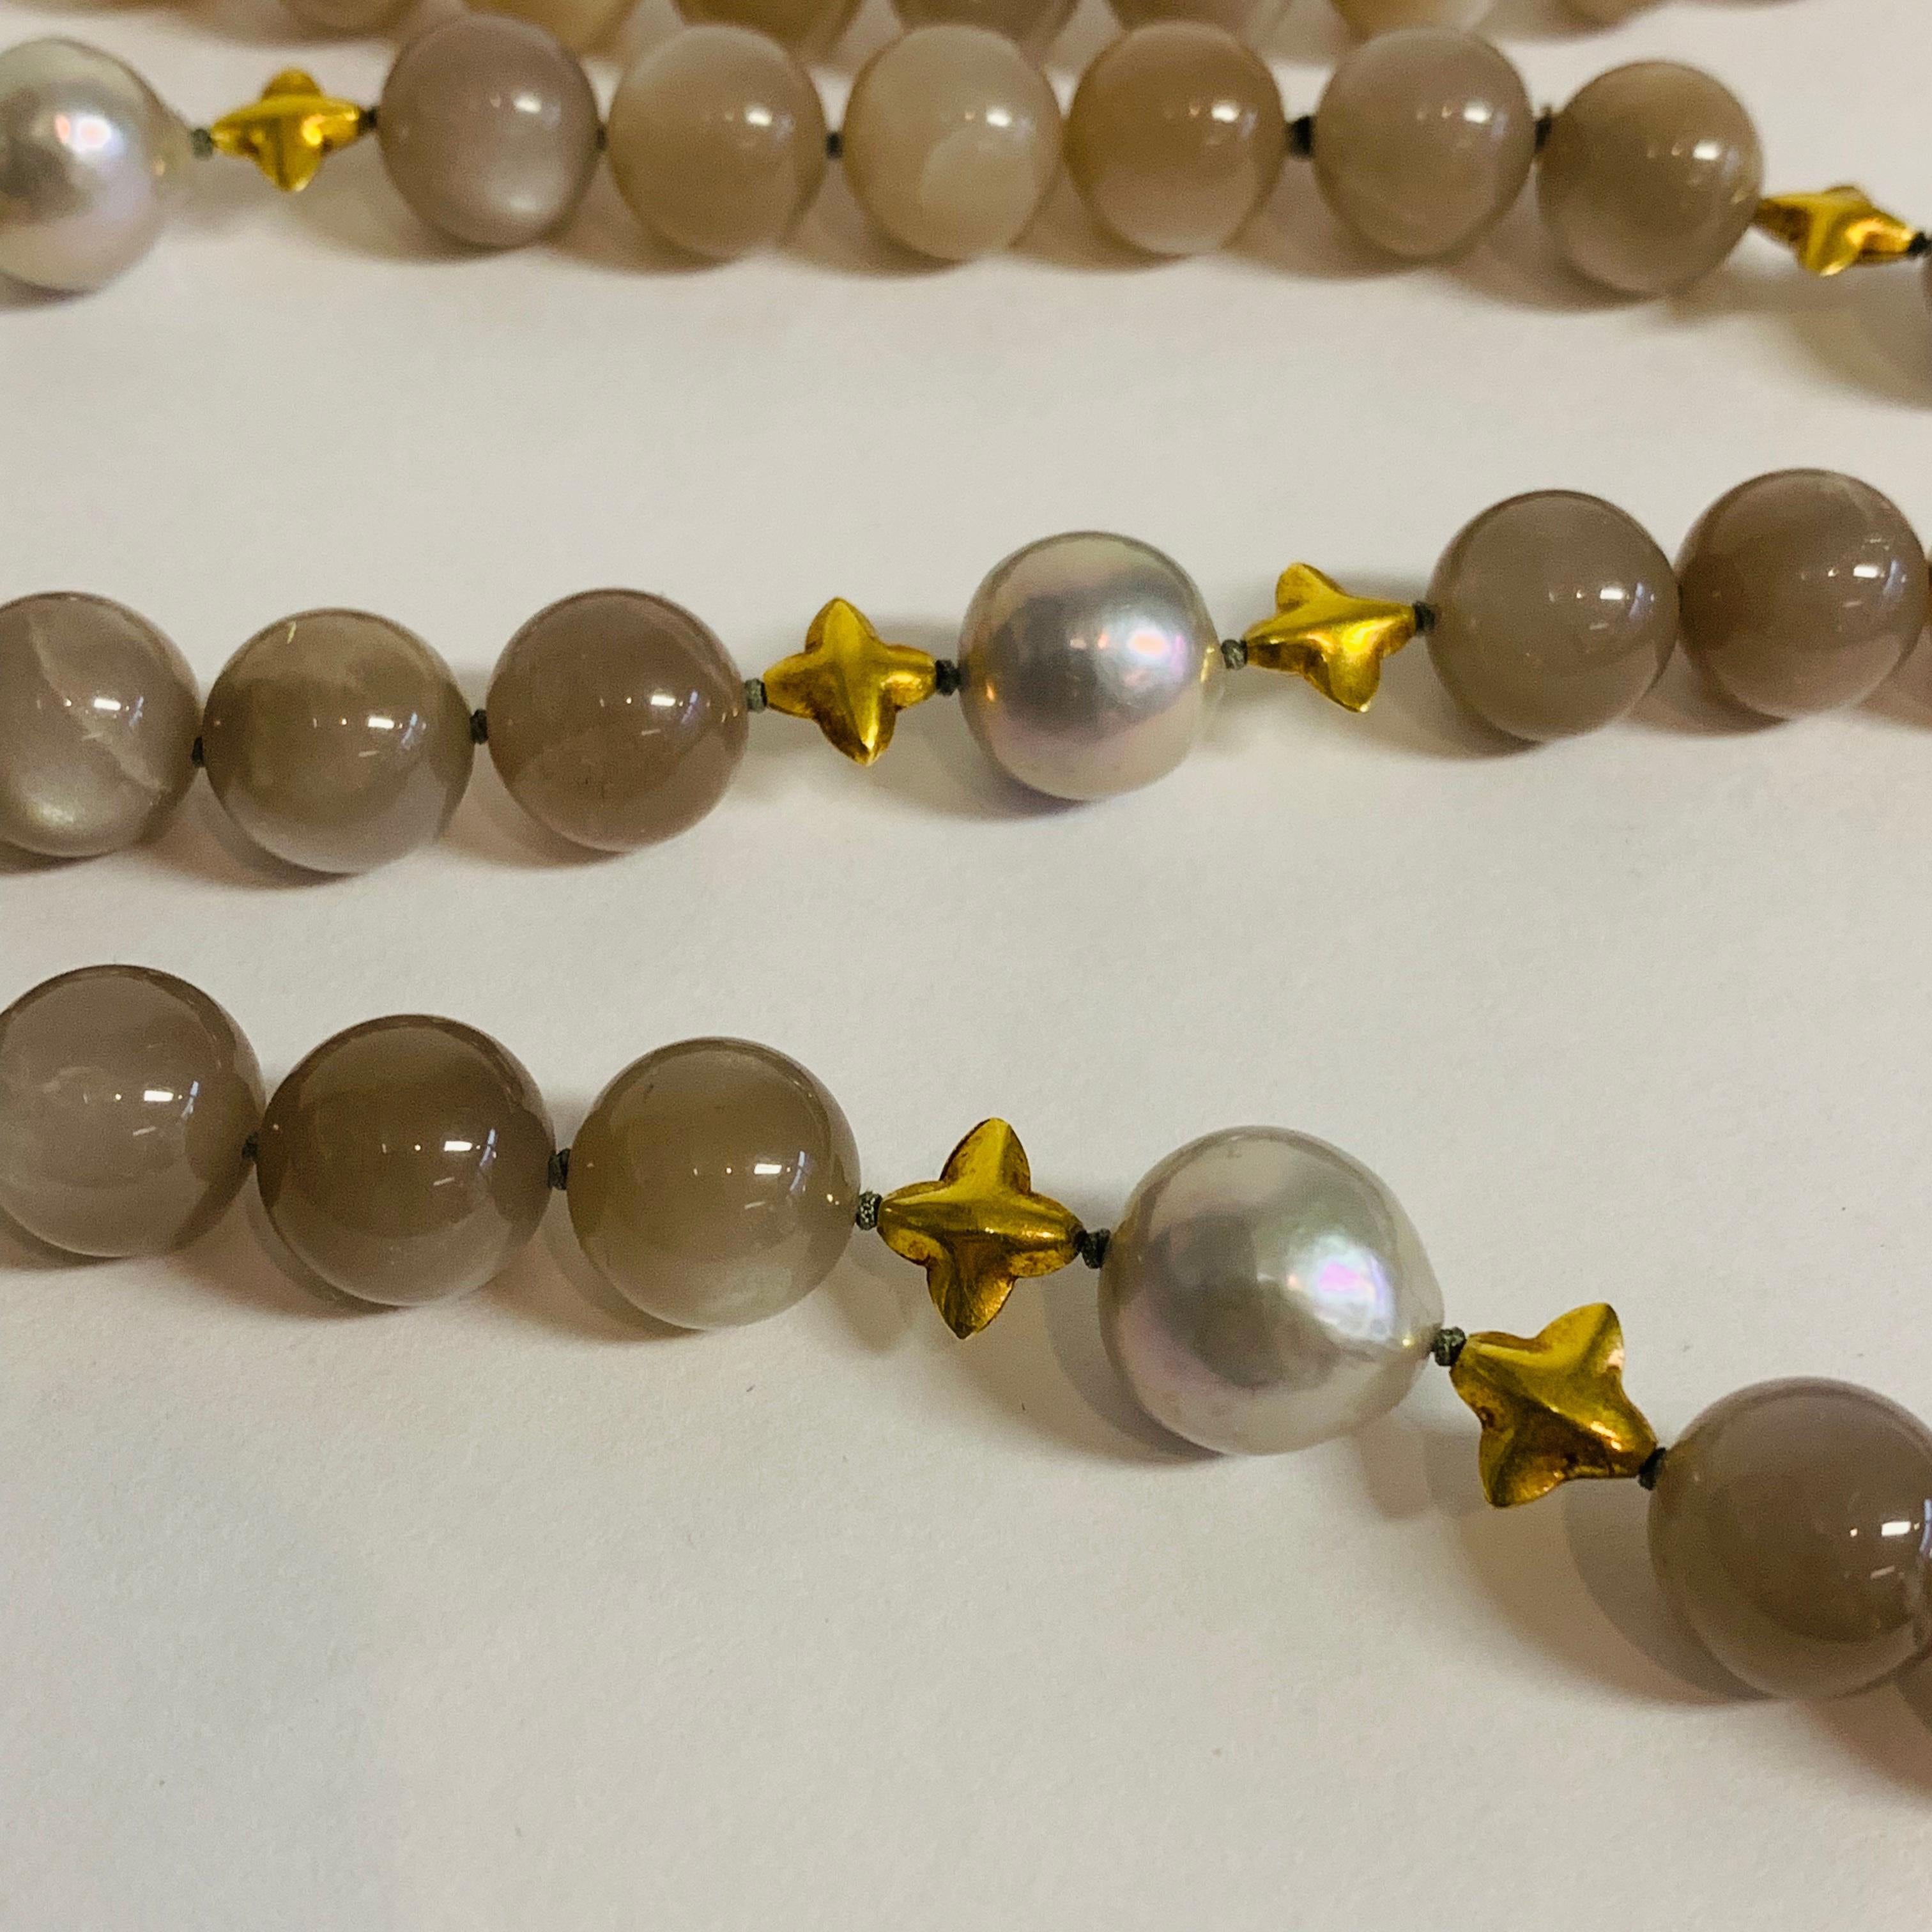 The moonstones with their beautiful soft grey sheen are enhanced by freshwater pearls and star-shaped 18k gold beads. A unique and elegantly feminine addition to any outfit.

Designed by AMANDA CLARK for Altfield, our collection focuses on natures